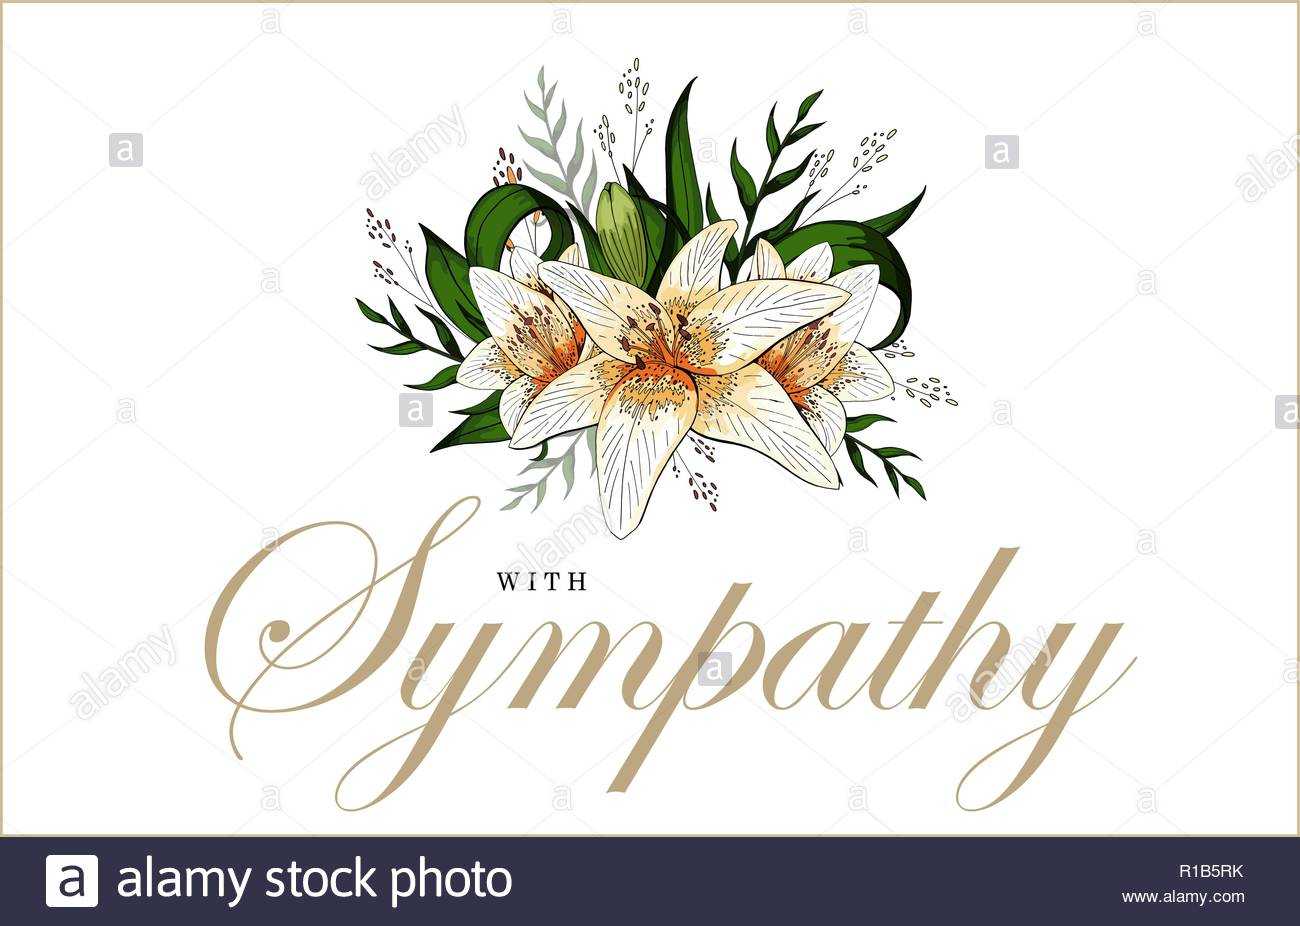 Condolences Sympathy Card Floral Lily Bouquet And Lettering Intended For Sympathy Card Template